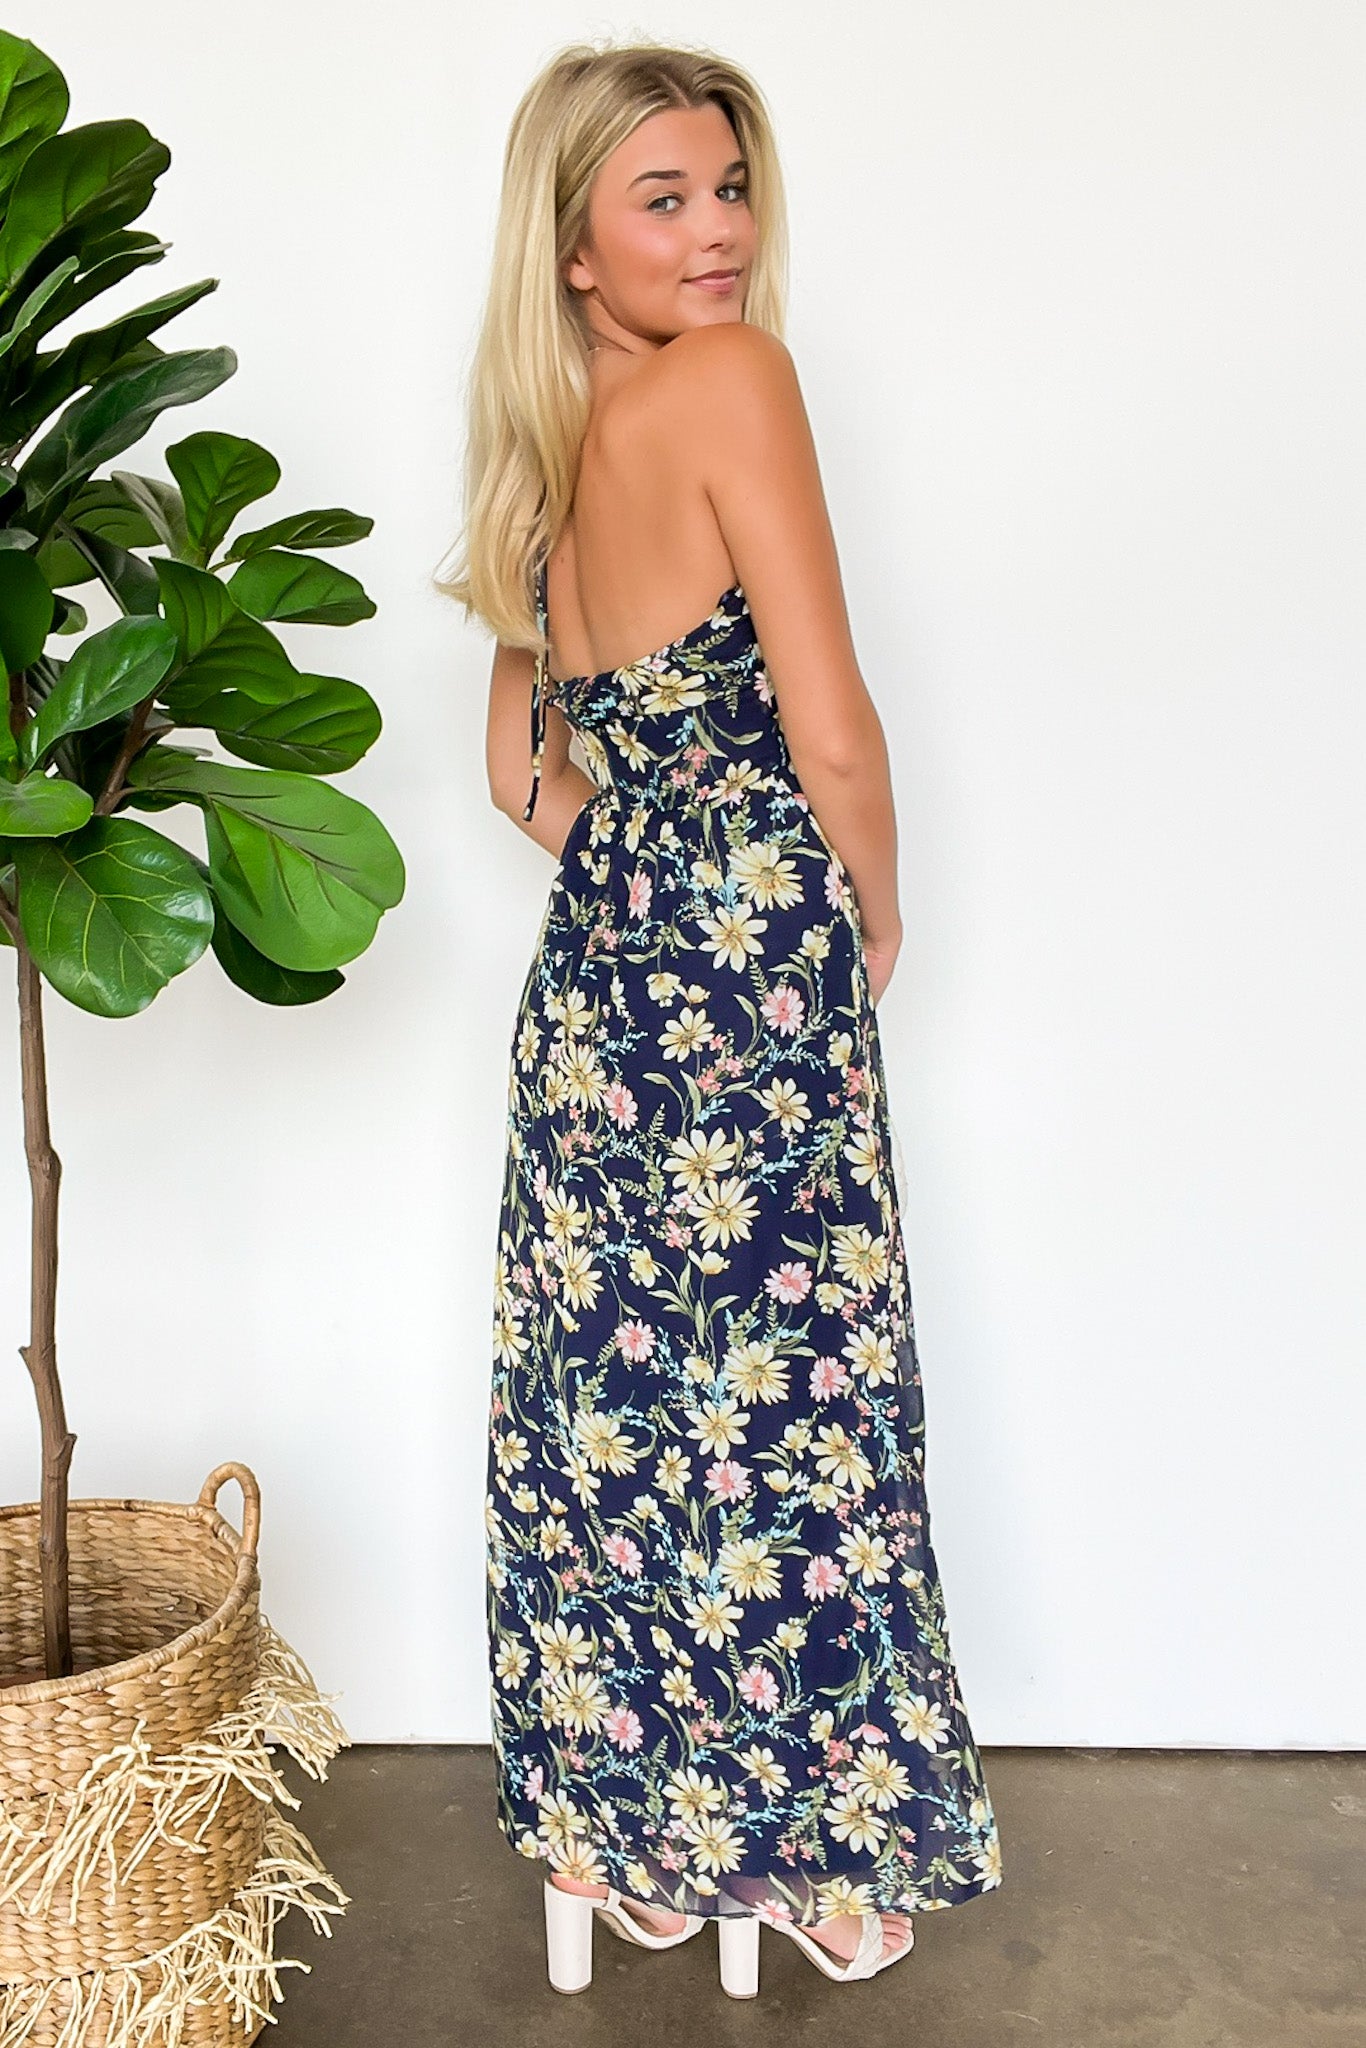  Picturesque Allure Floral Halter Cutout Dress - Madison and Mallory